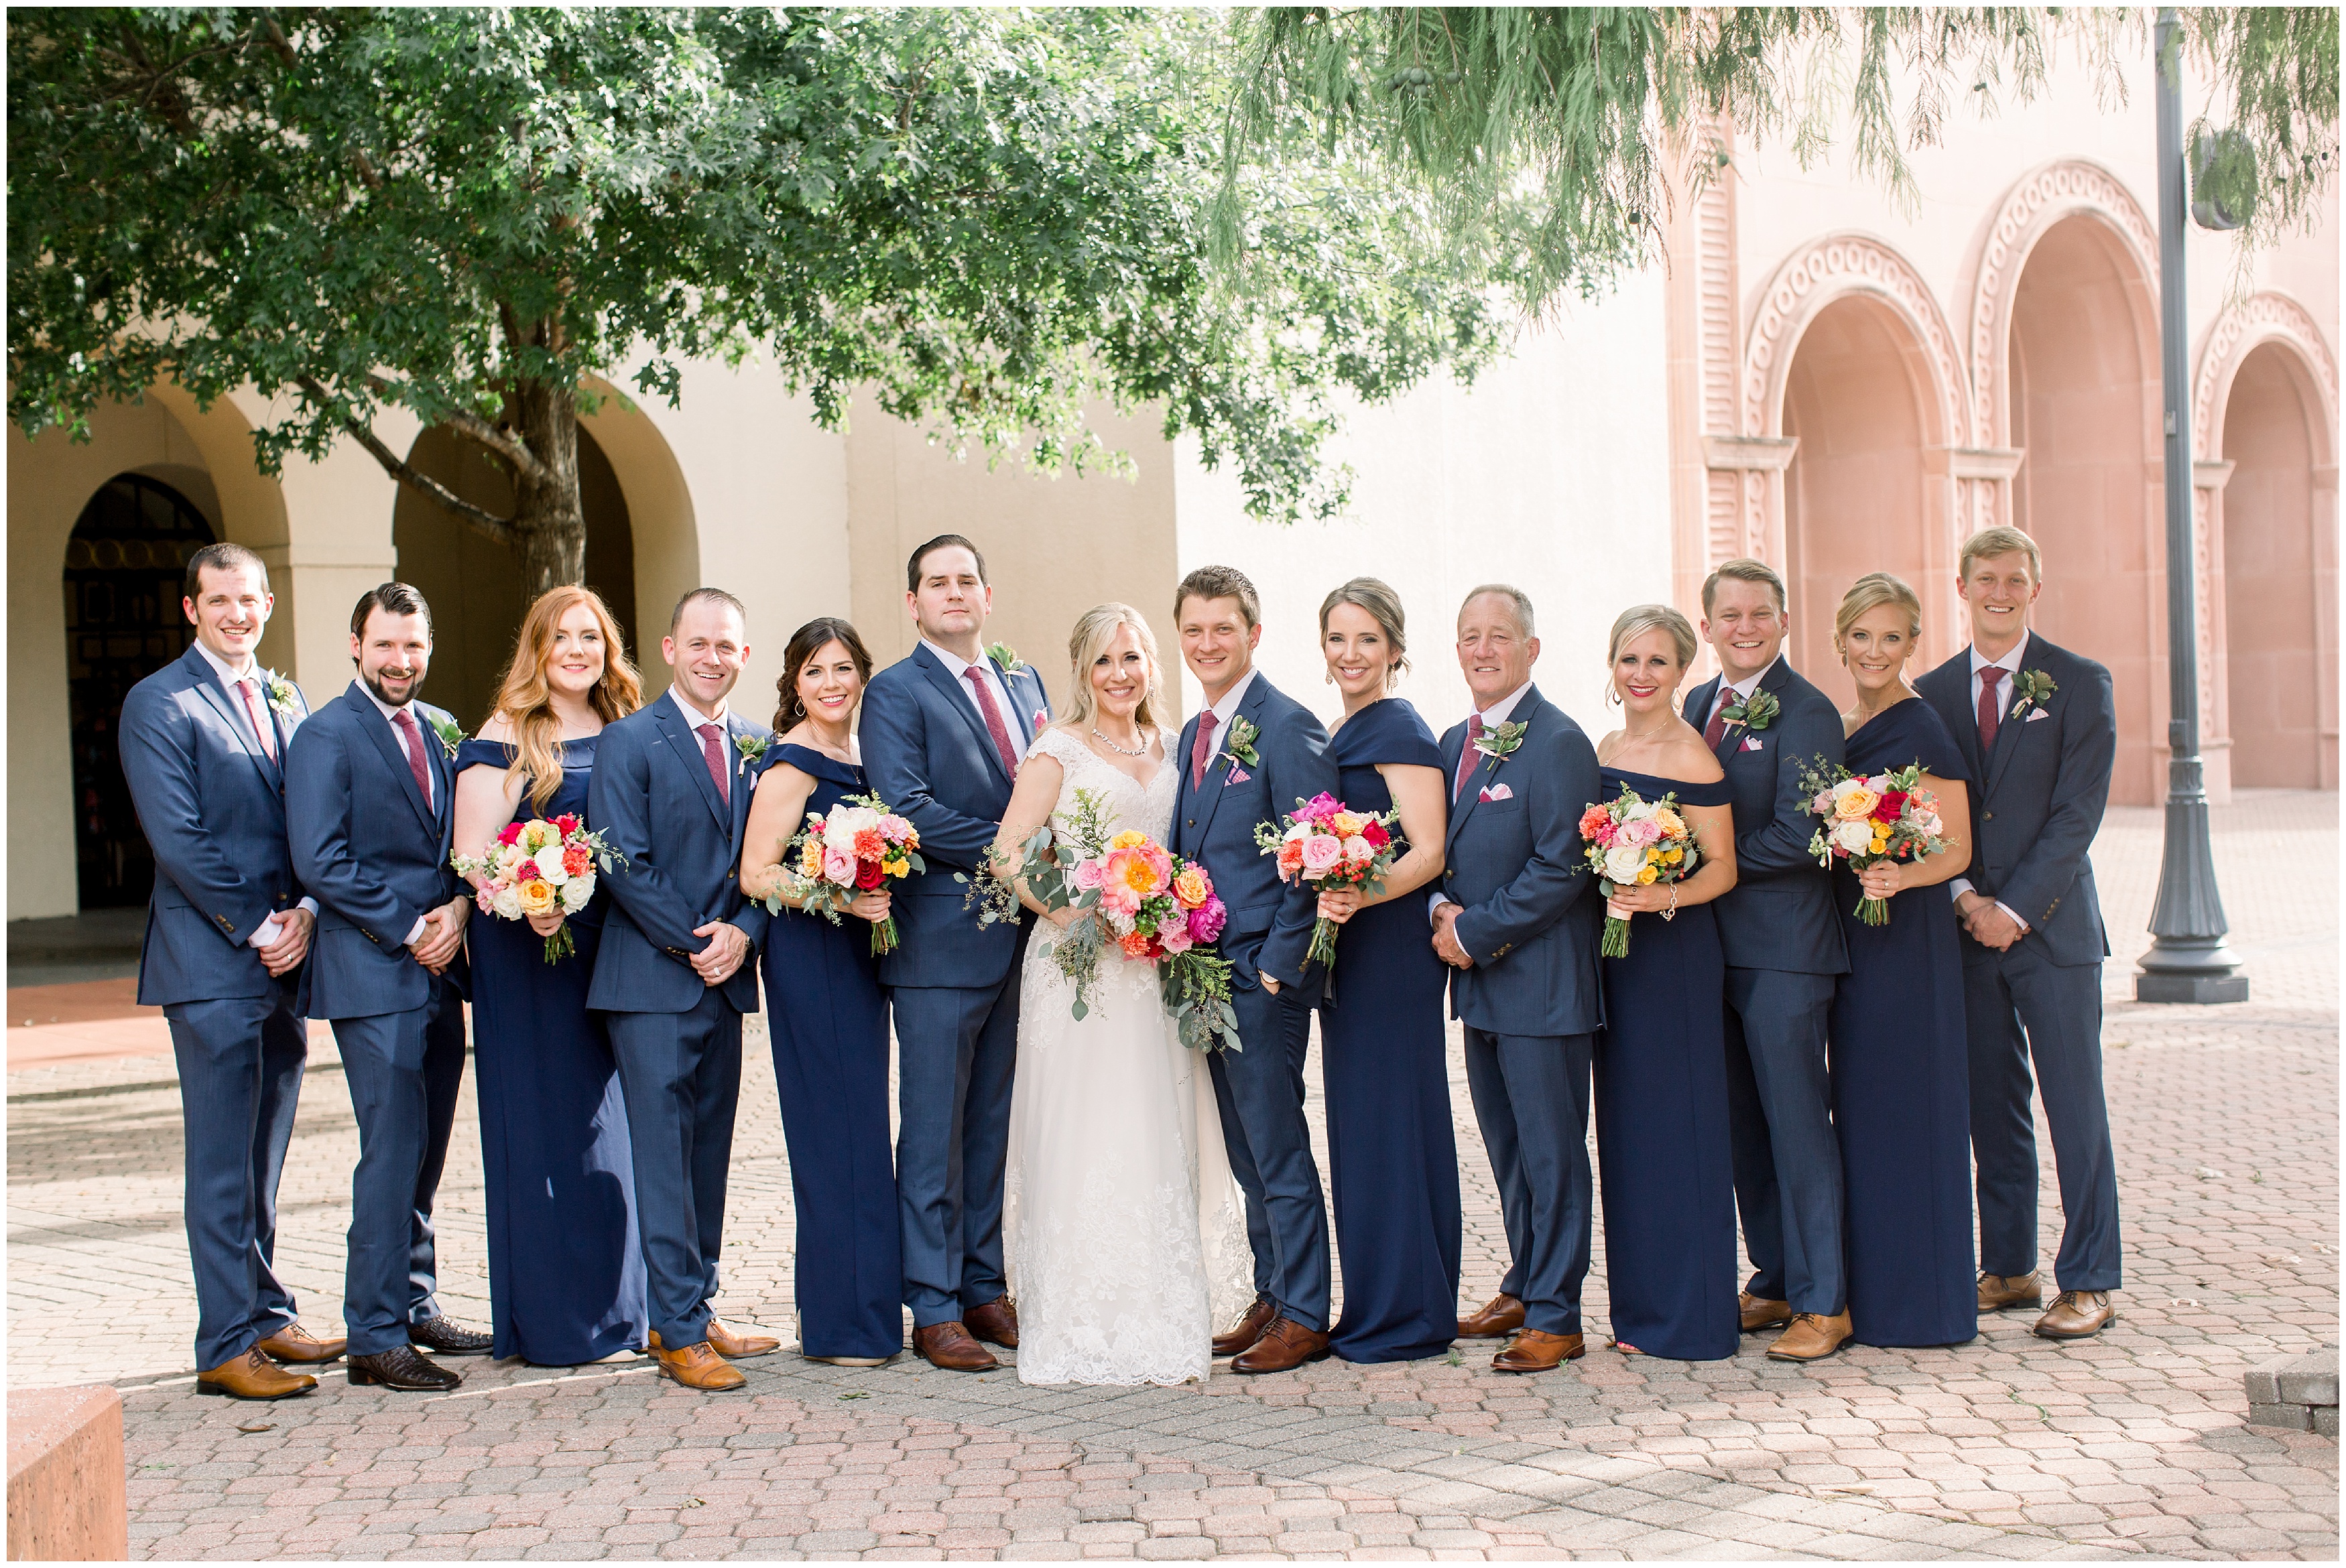 St. Ann's Catholic Wedding in Coppell, TX by photographer Courtney Bosworth.